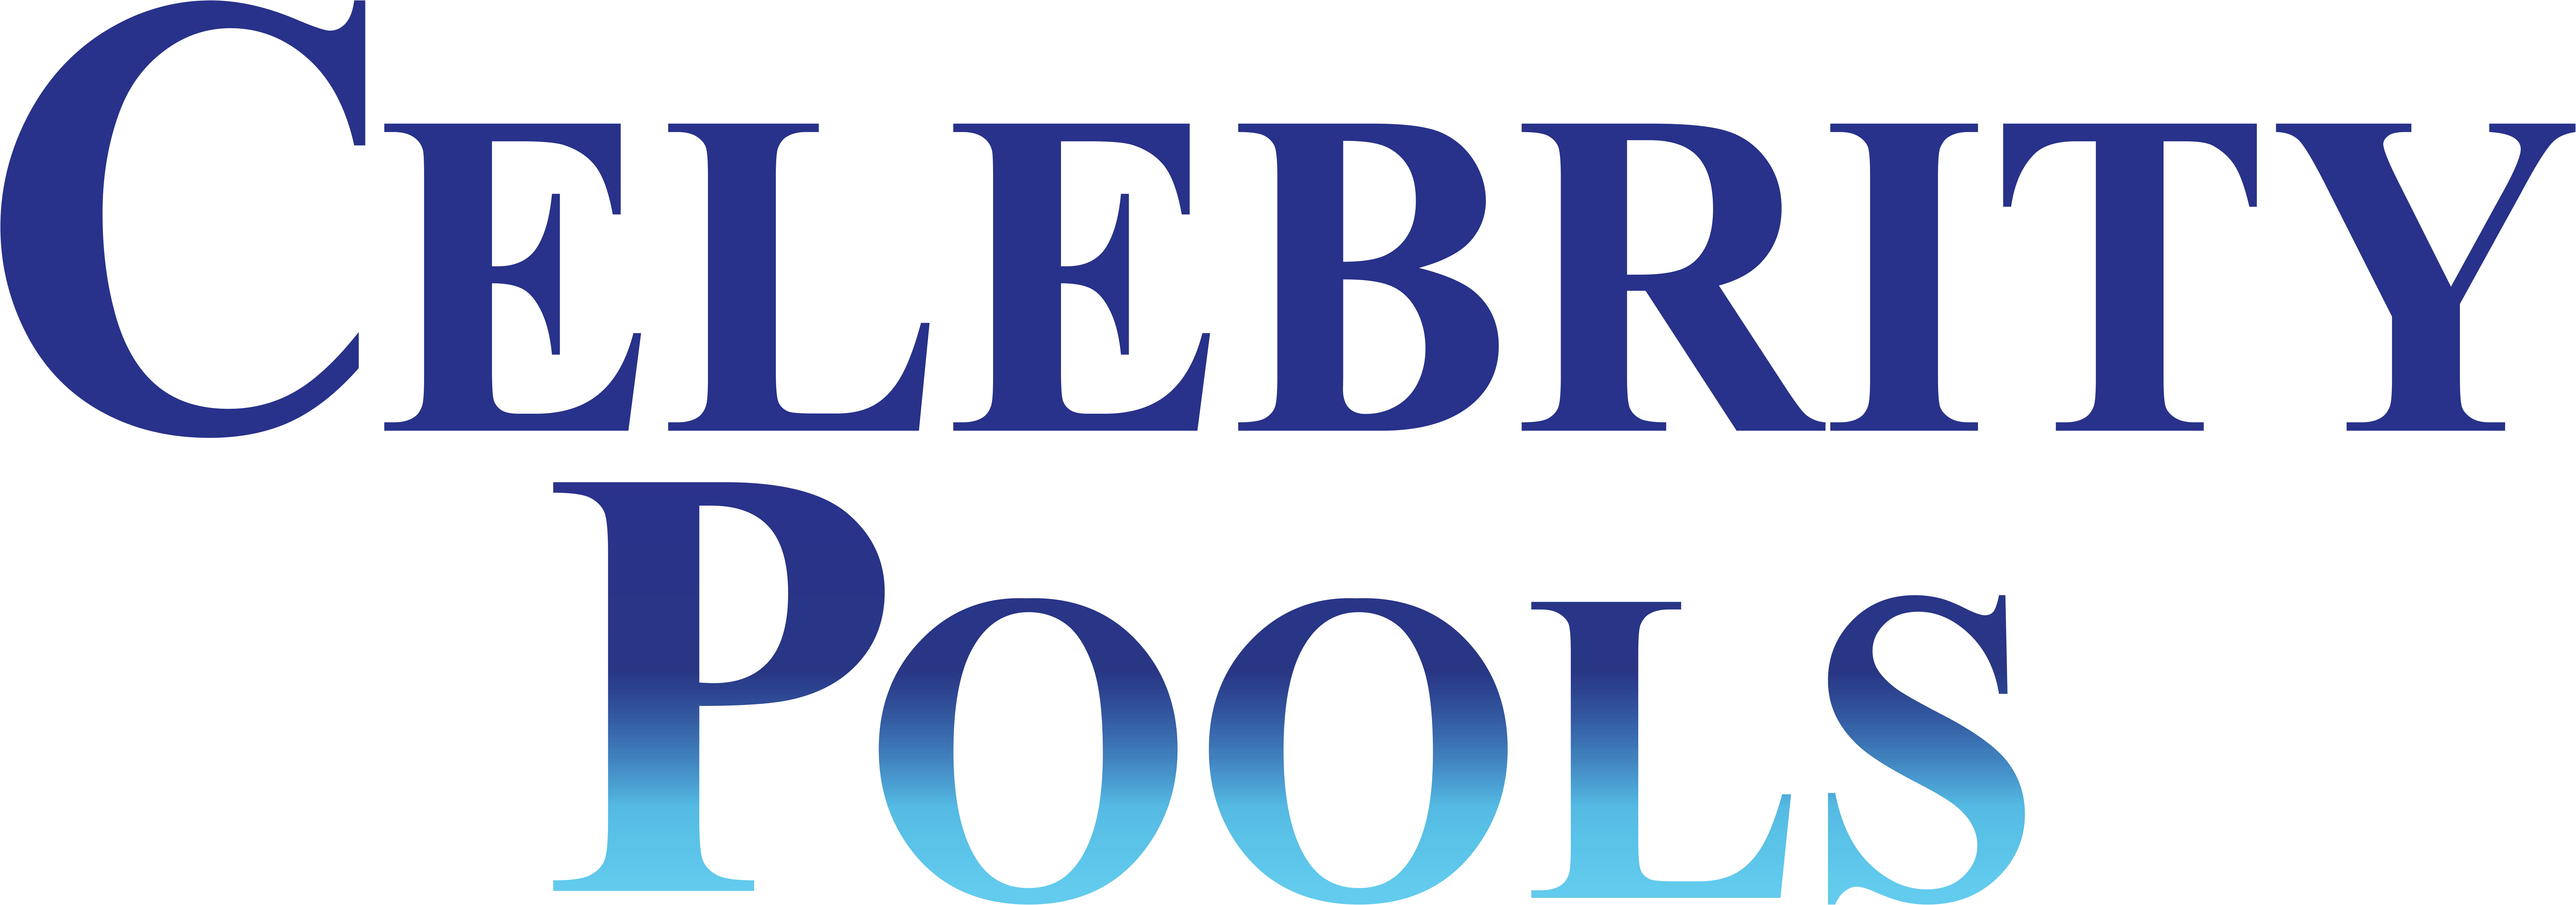 Celebrity Pool and Spa Logo